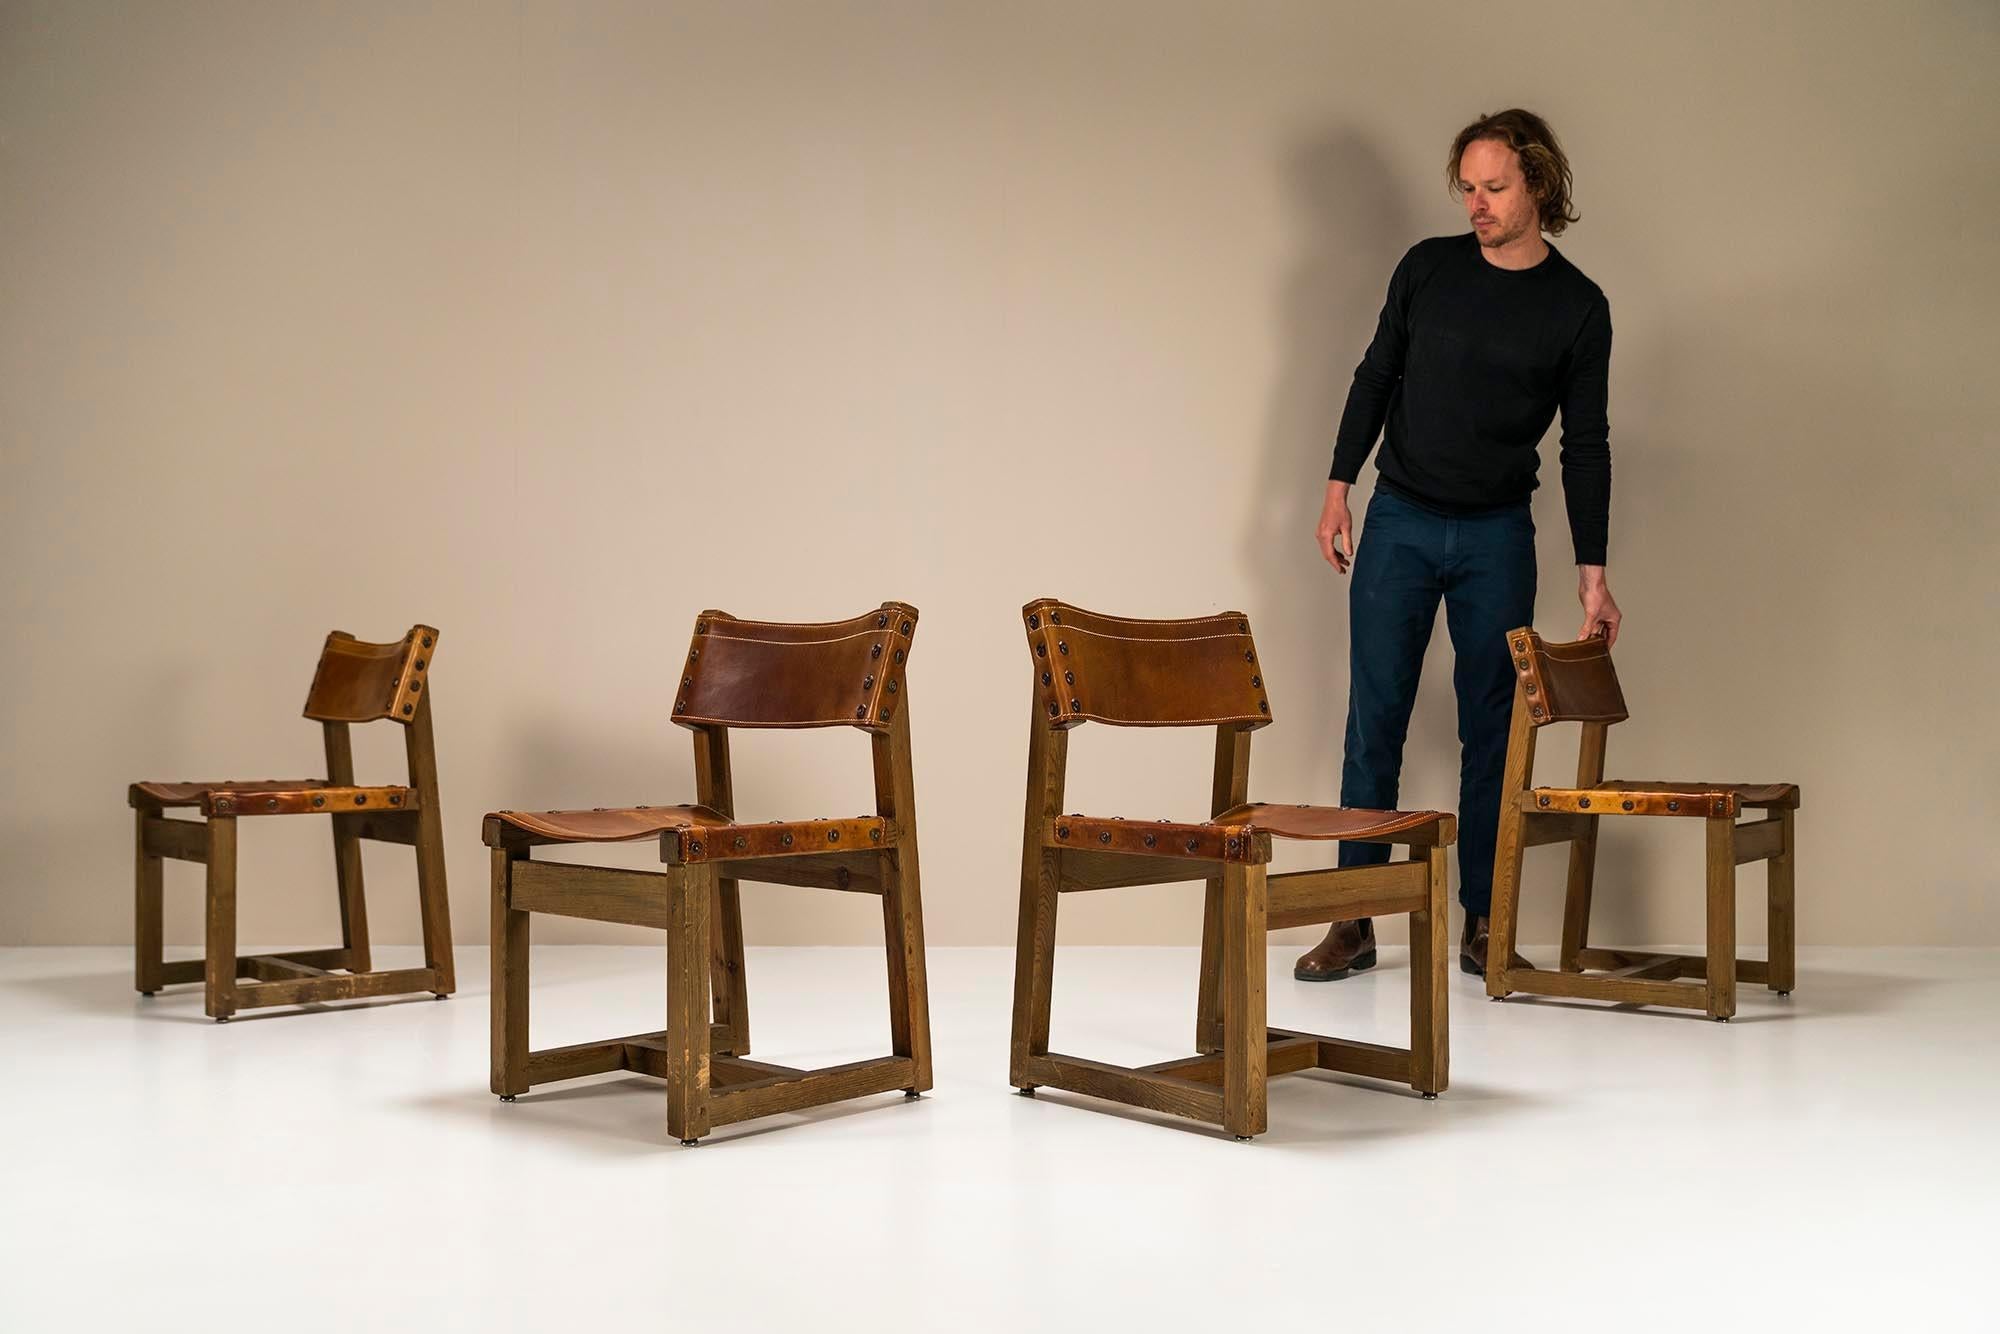 Biosca set of 4 chairs in pine and cognac saddle leather.A beautiful set of four chairs manufactured by the rather mysterious Biosca. What we also mentioned in the description of the sideboard is that little is known about this Spanish furniture